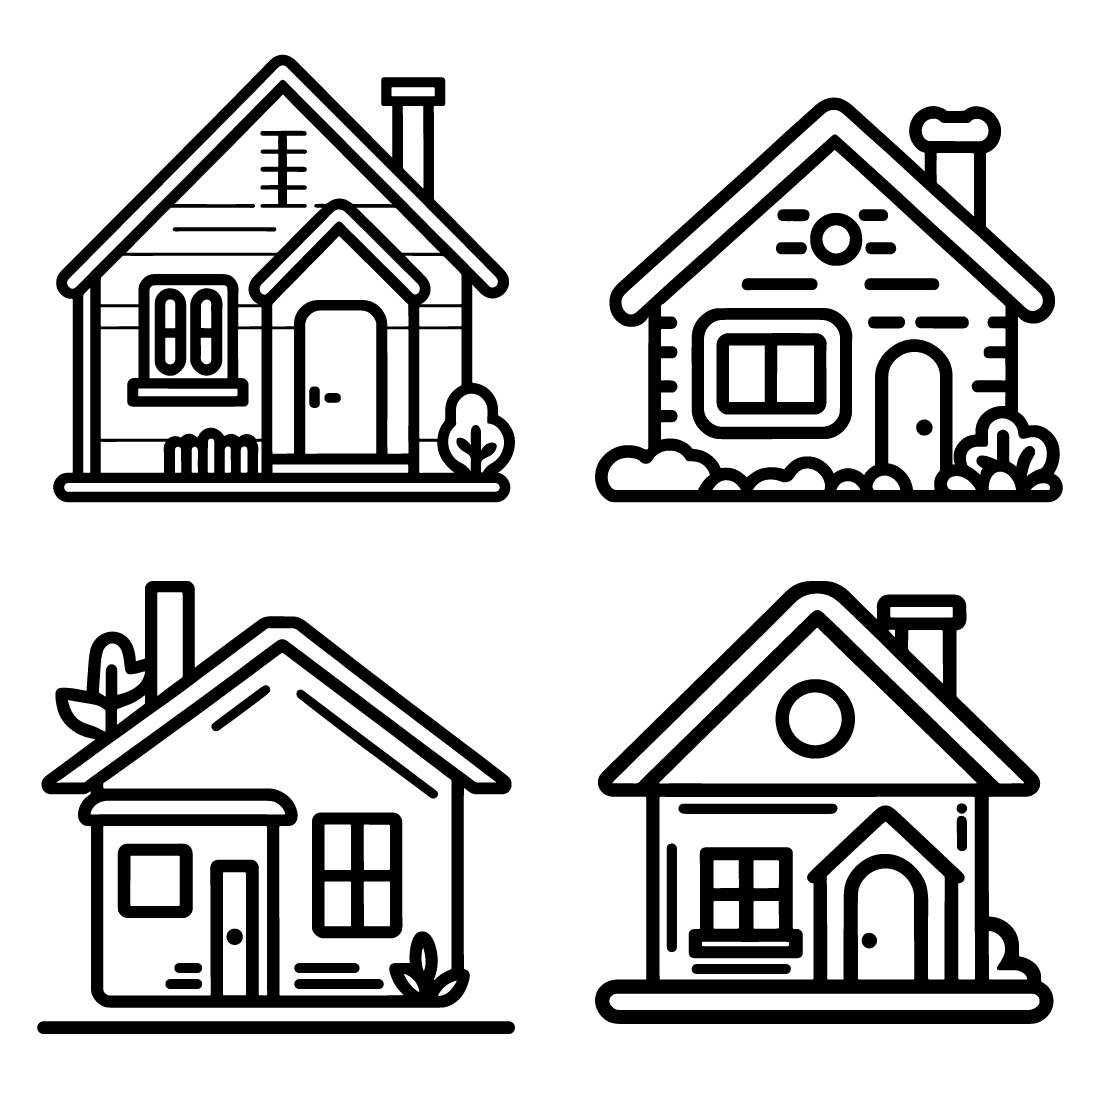 Home Icon set, Illustration of house icons, Black and white house icons, Outline Style, Home line art icons, and clean simple design preview image.